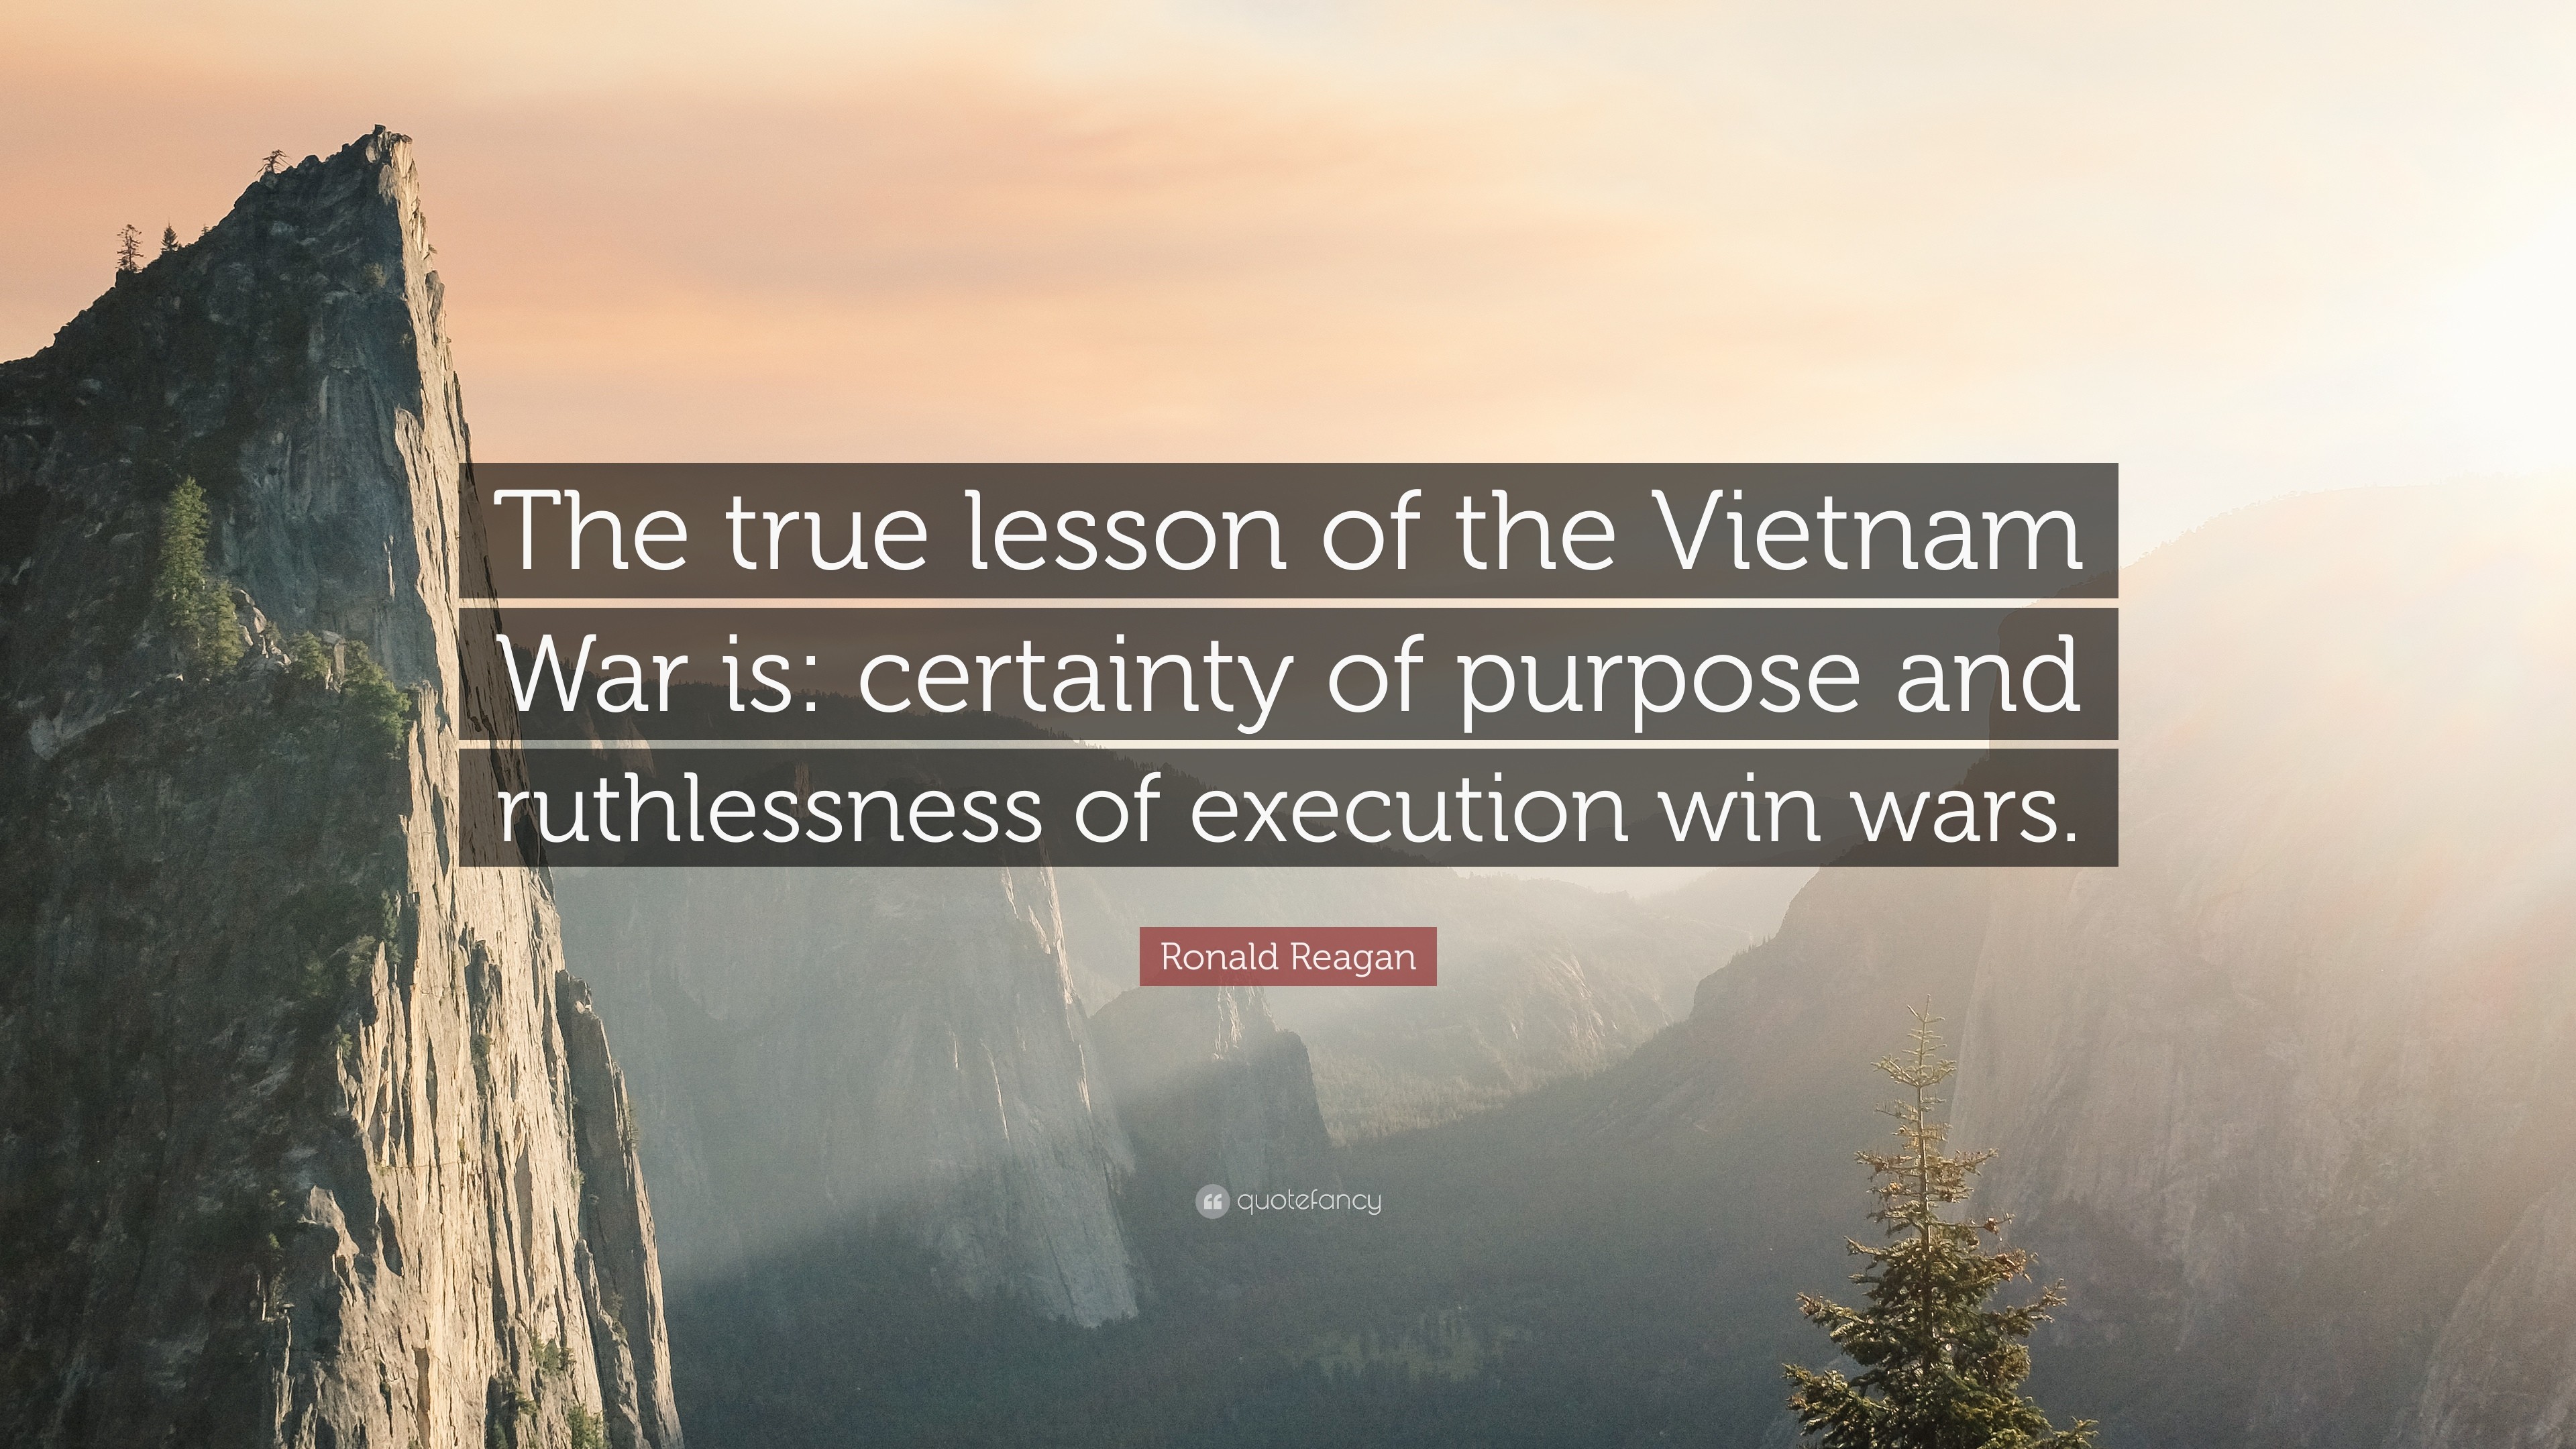 3840x2160 Ronald Reagan Quote: “The true lesson of the Vietnam War is: certainty of